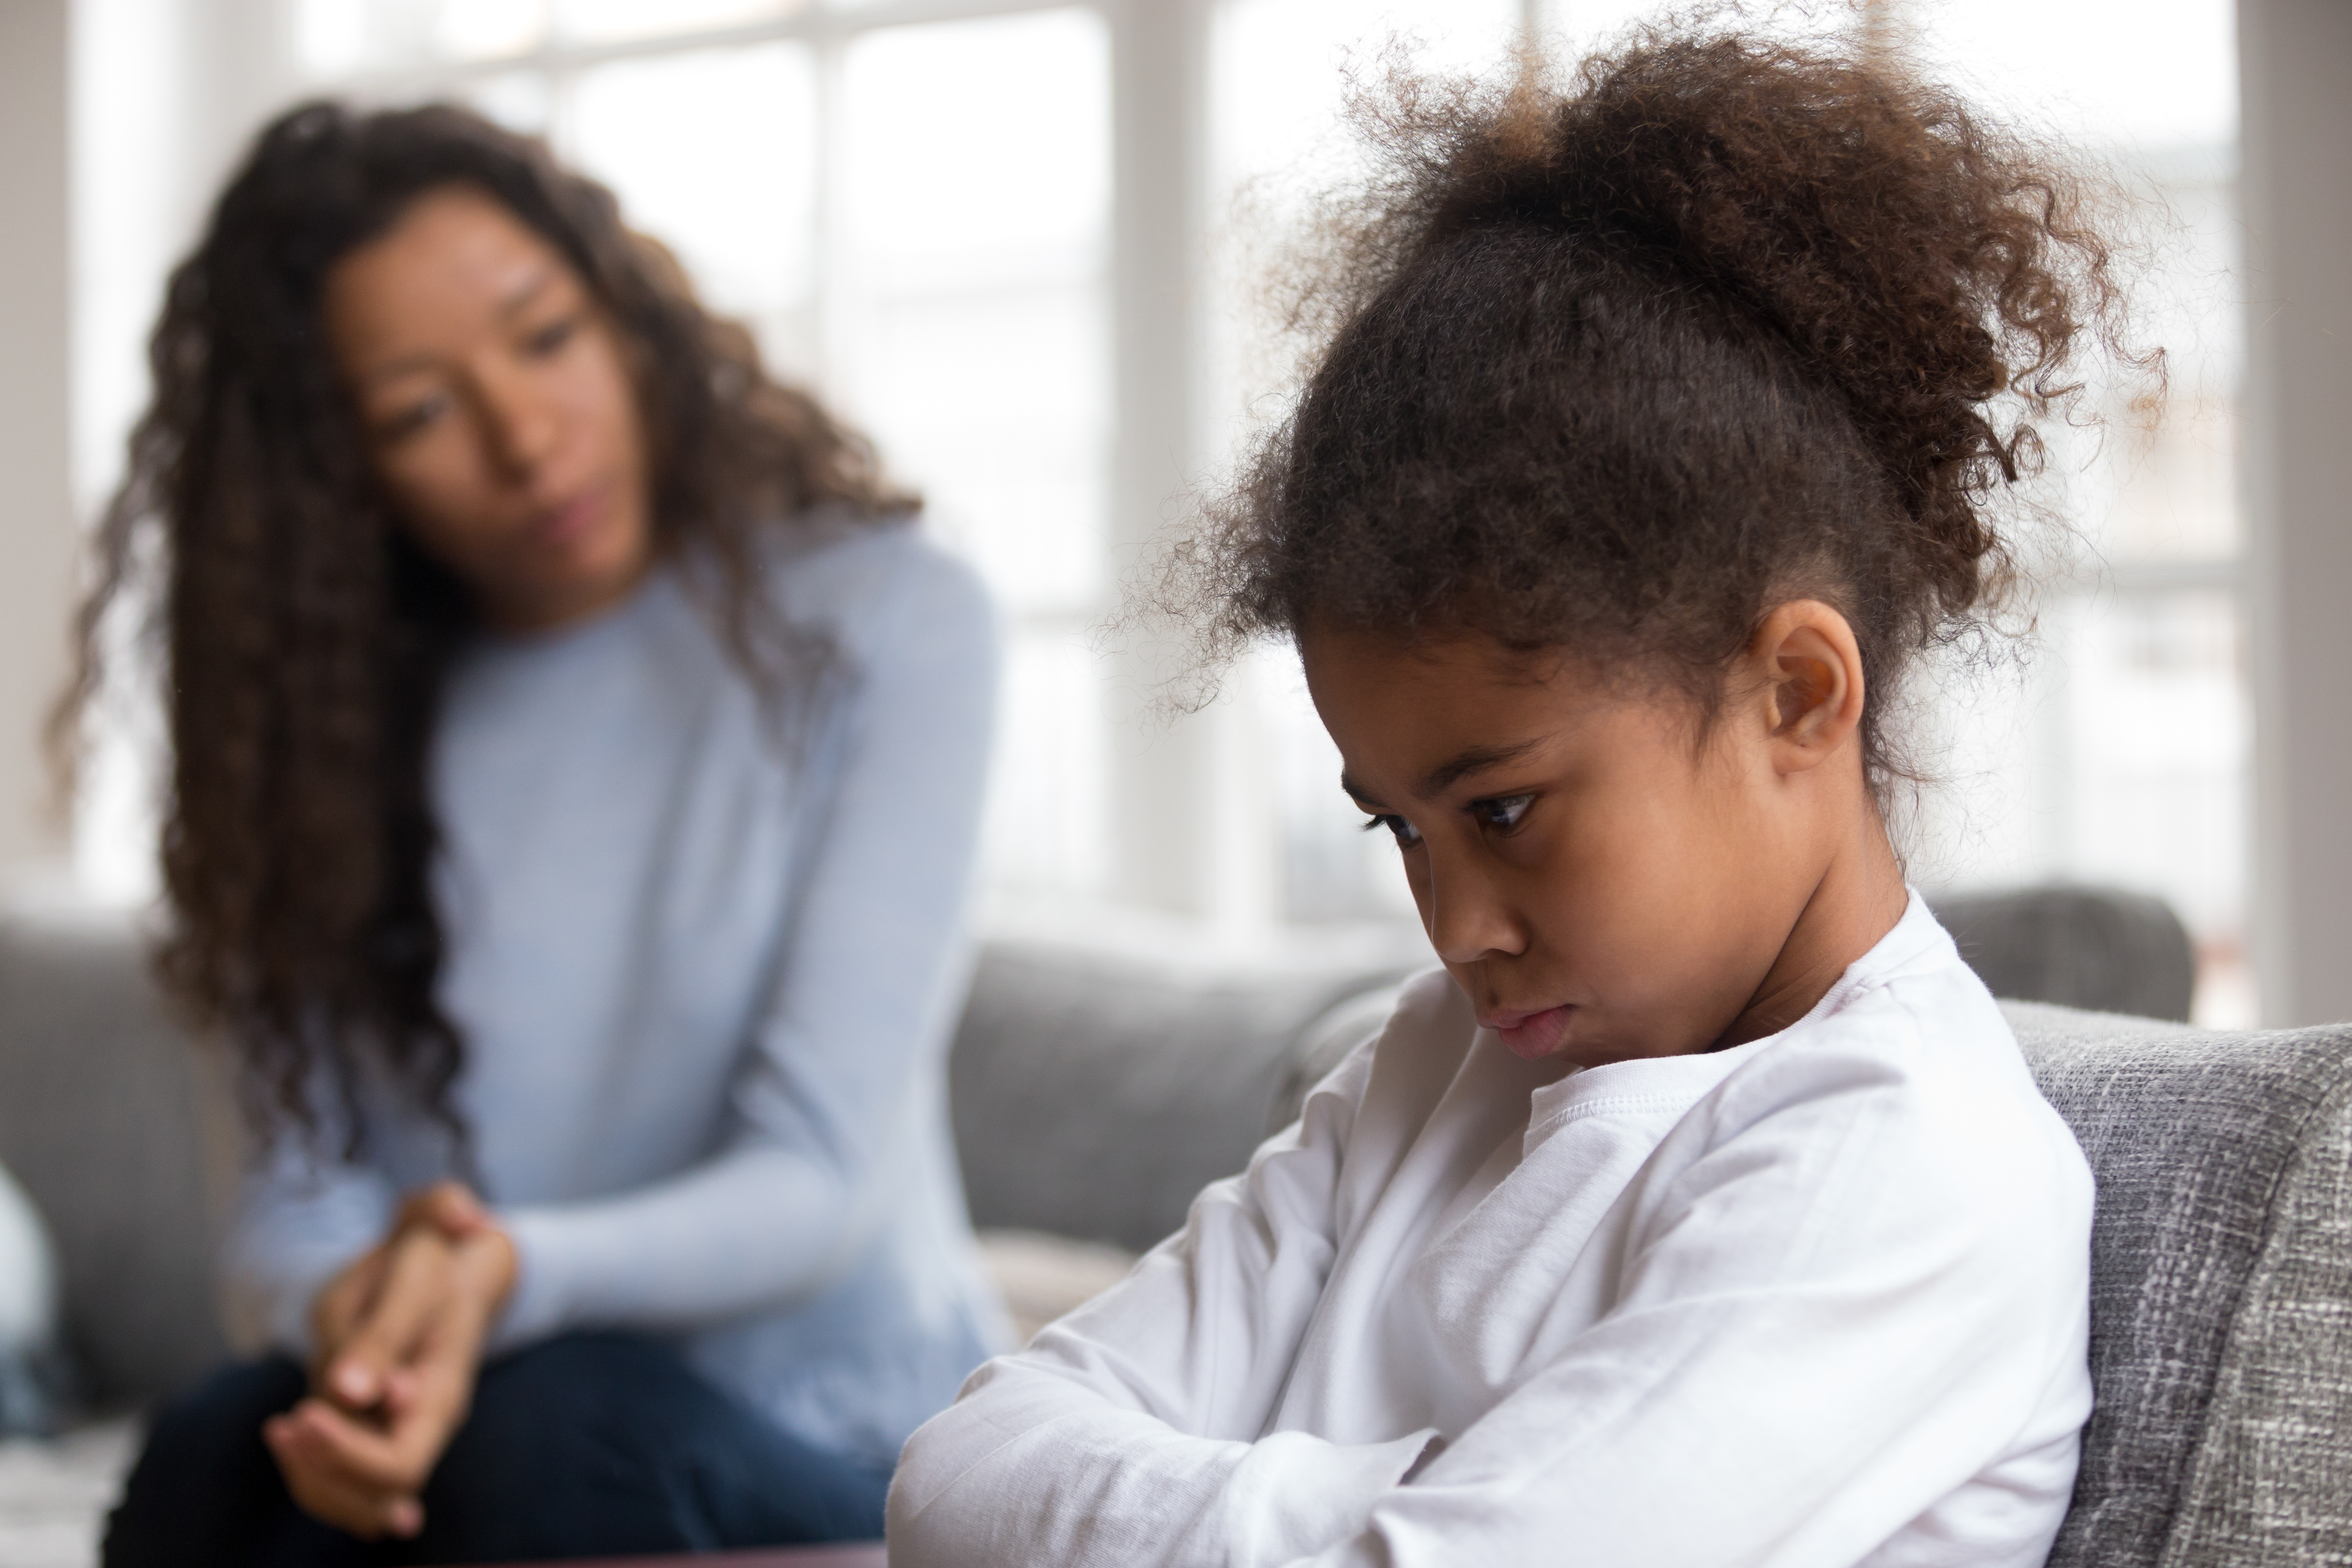 Child mental health: Little girl frowning with arms crossed, refusing to talk to mom in background